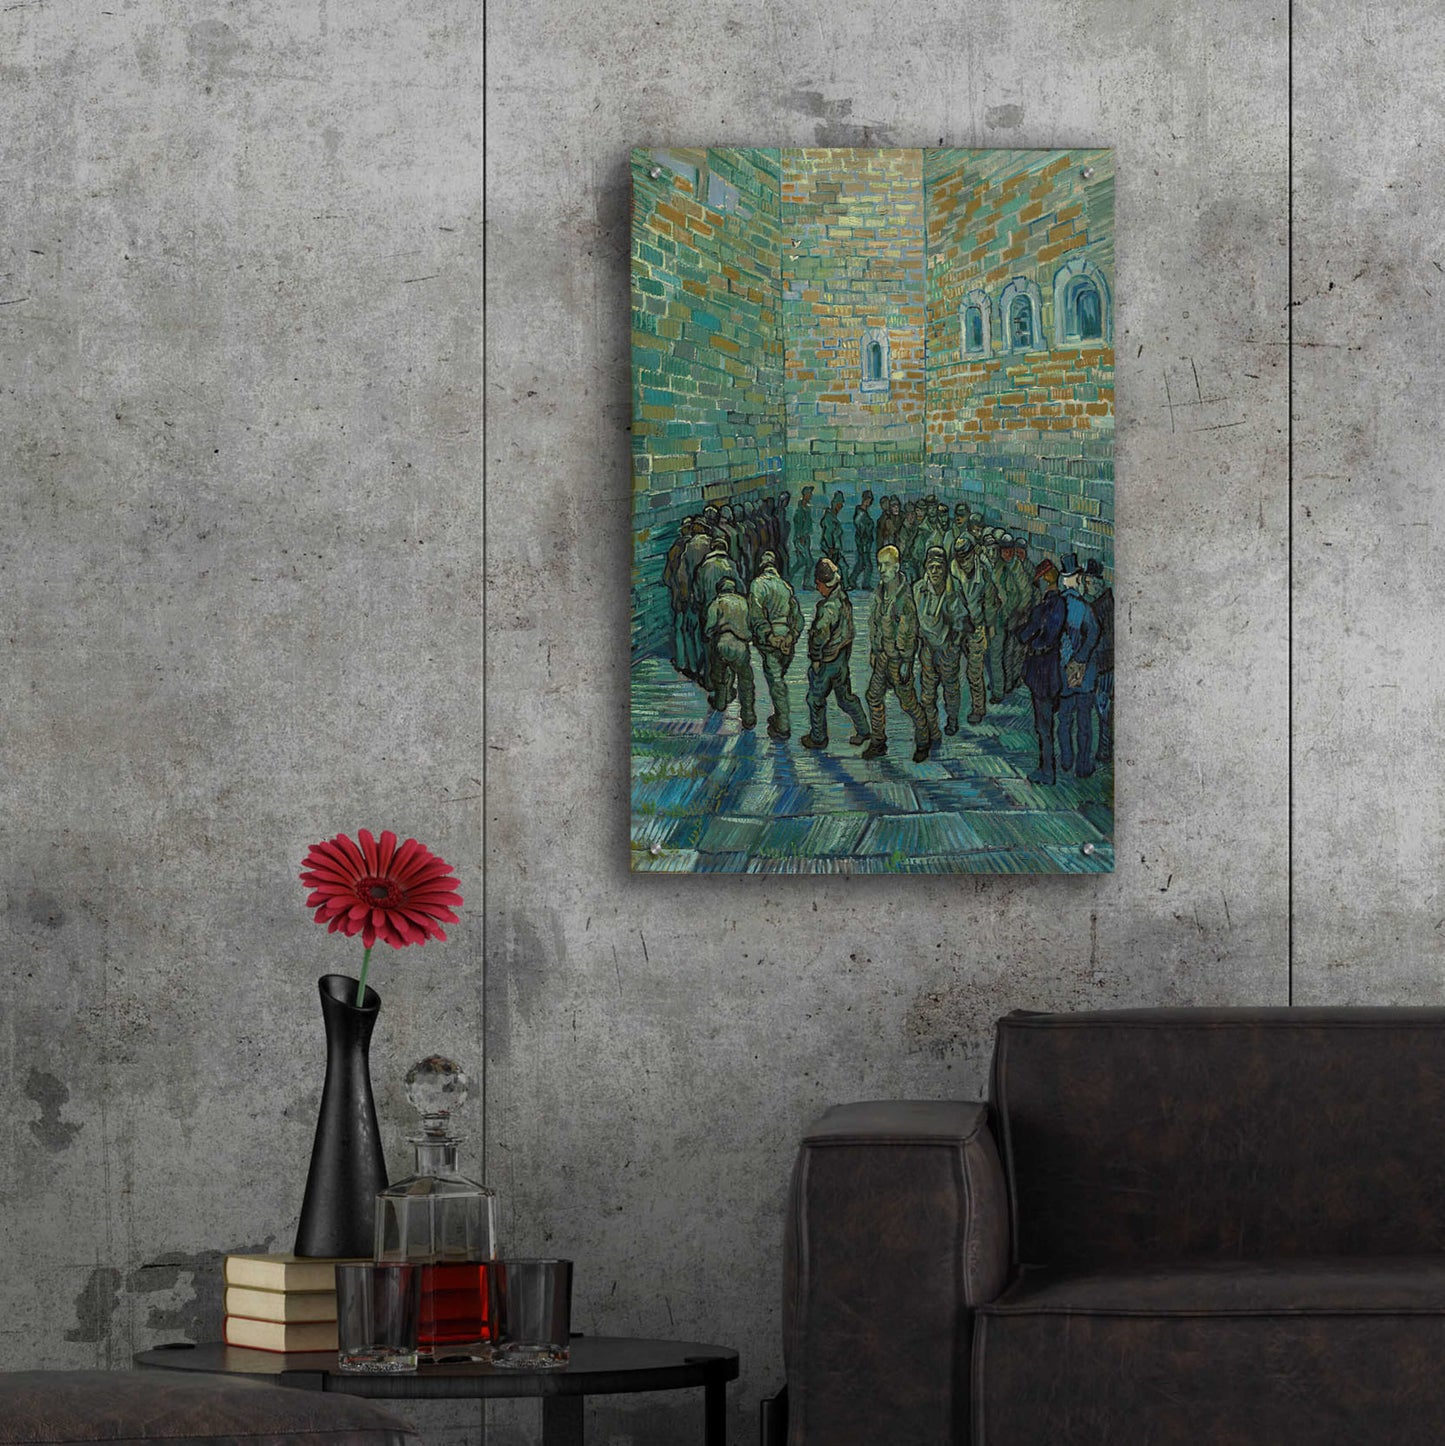 Epic Art 'The Prison Courtyard ' by Vincent Van Gogh, Acrylic Glass Wall Art,24x36